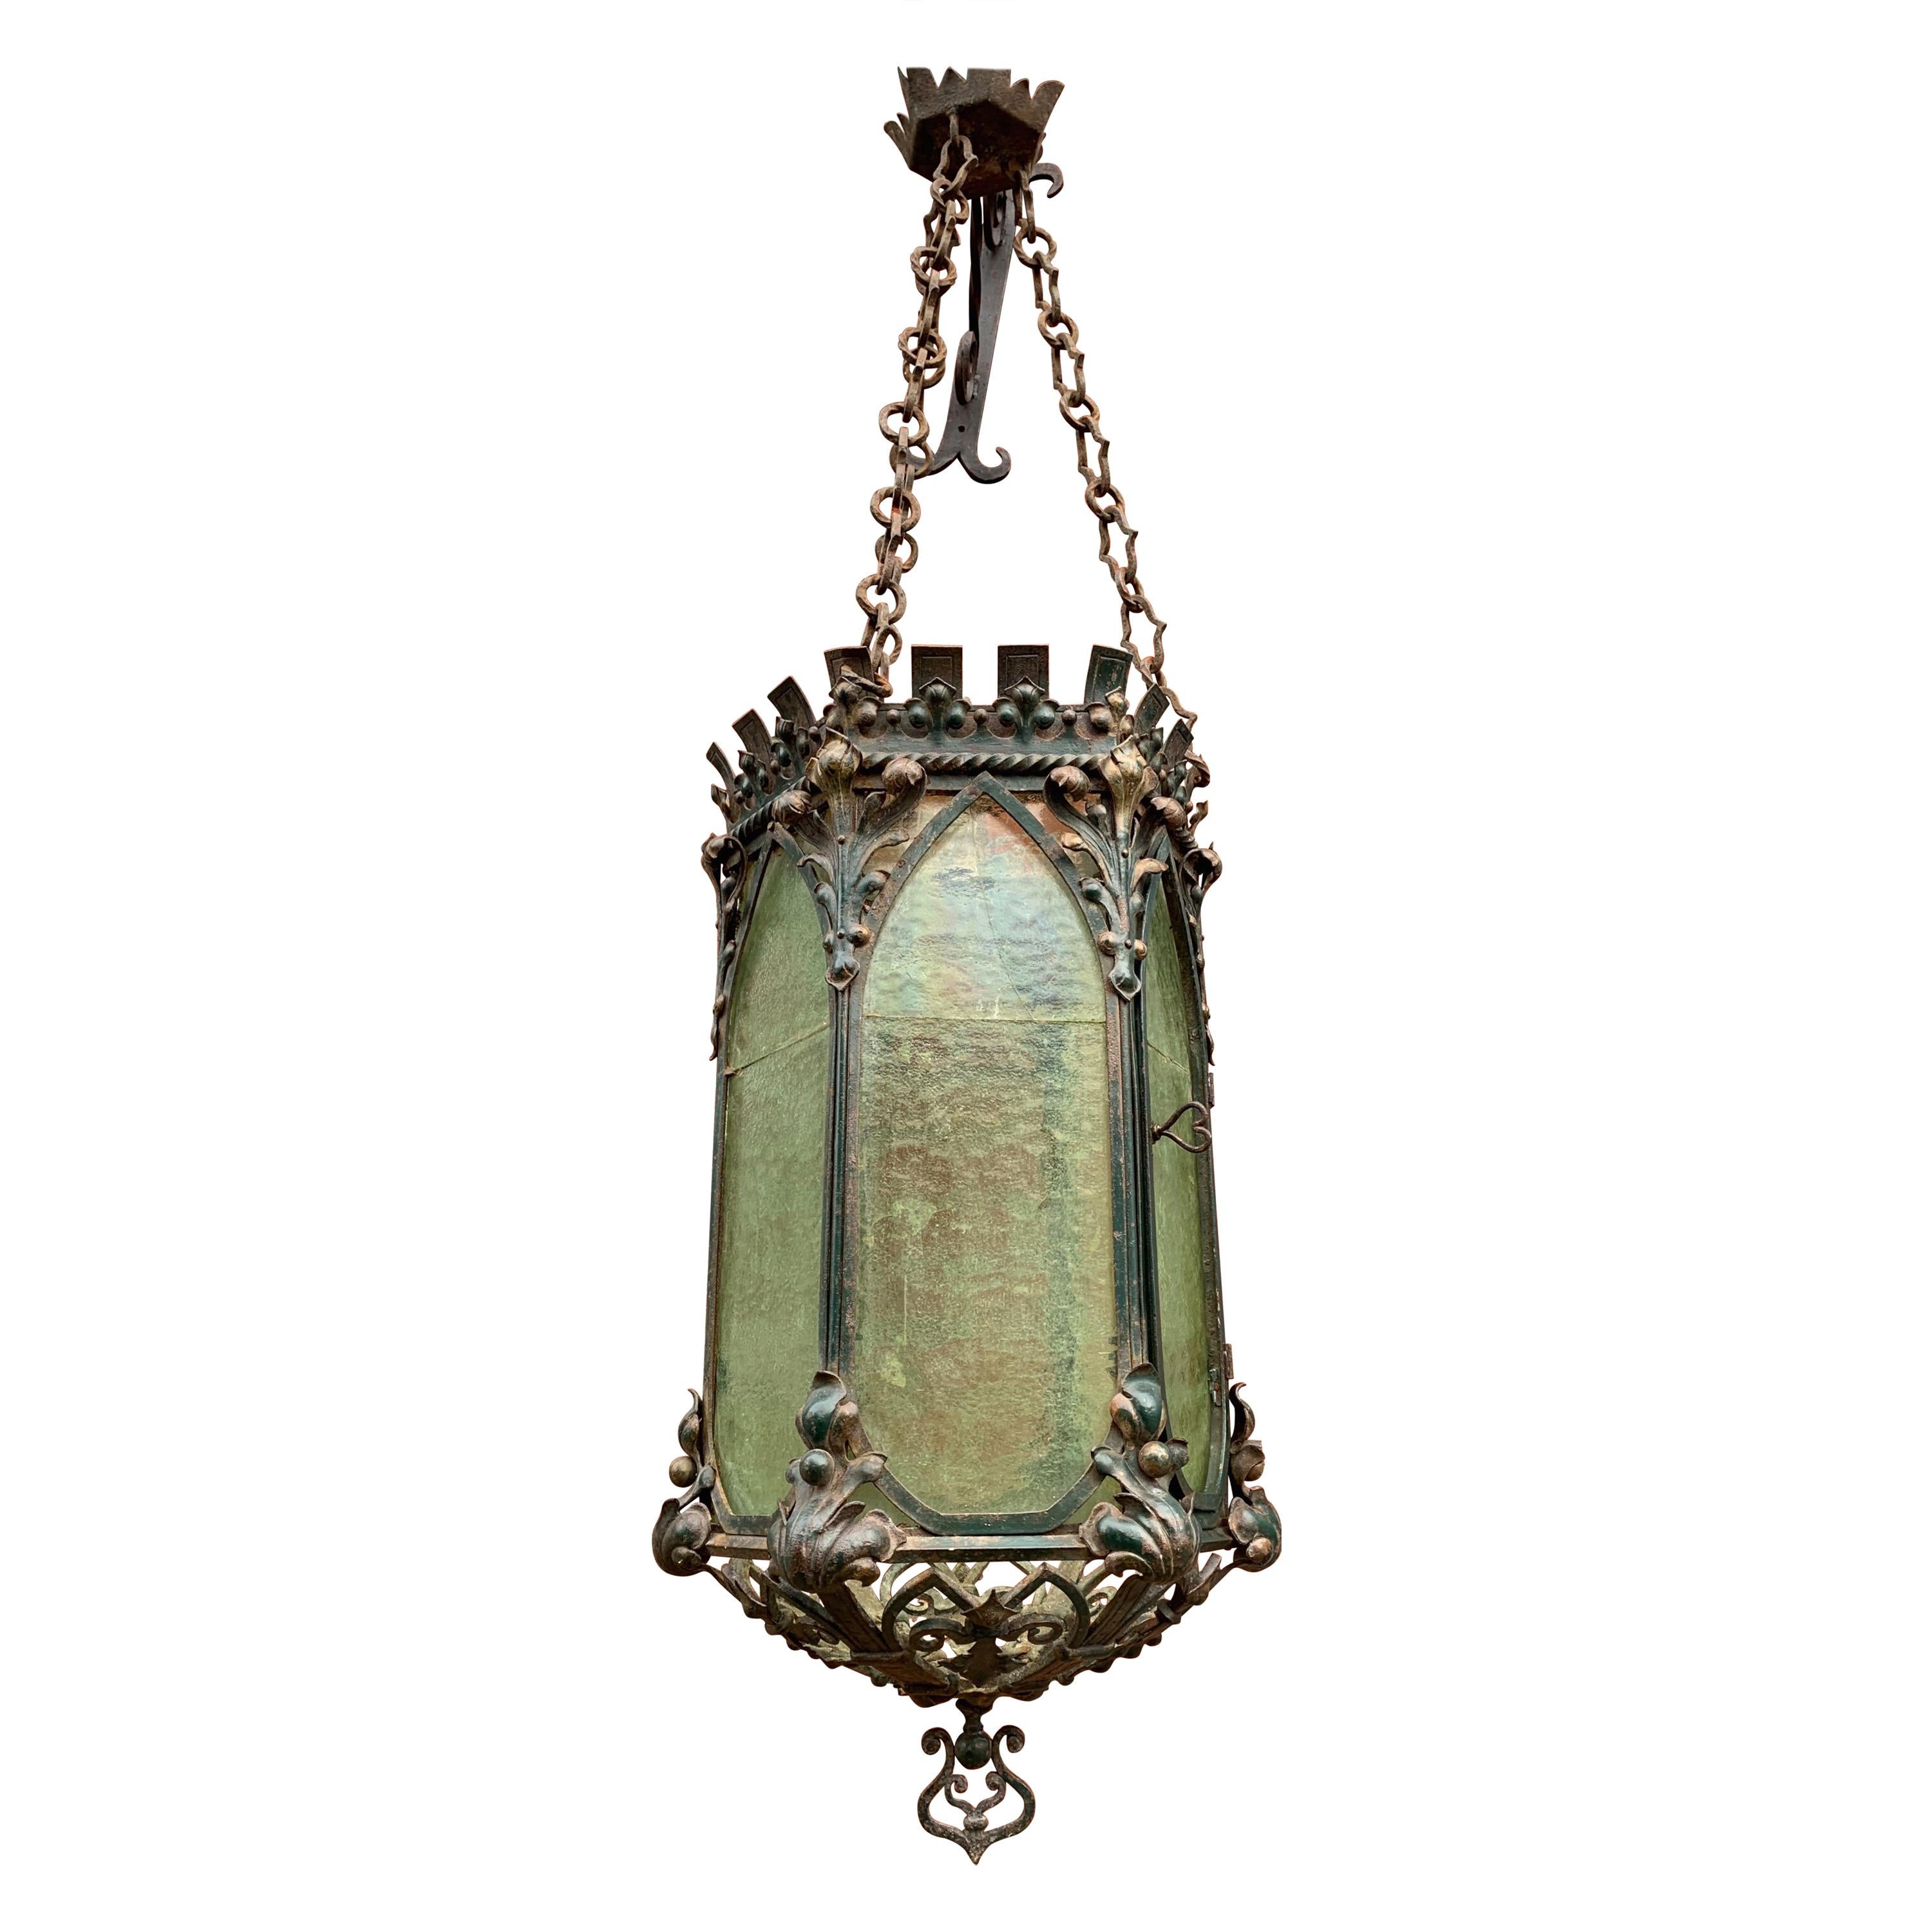 Gothic Revival Medieval Style Extra Large Wrought Iron & Cathedral Glass Lantern